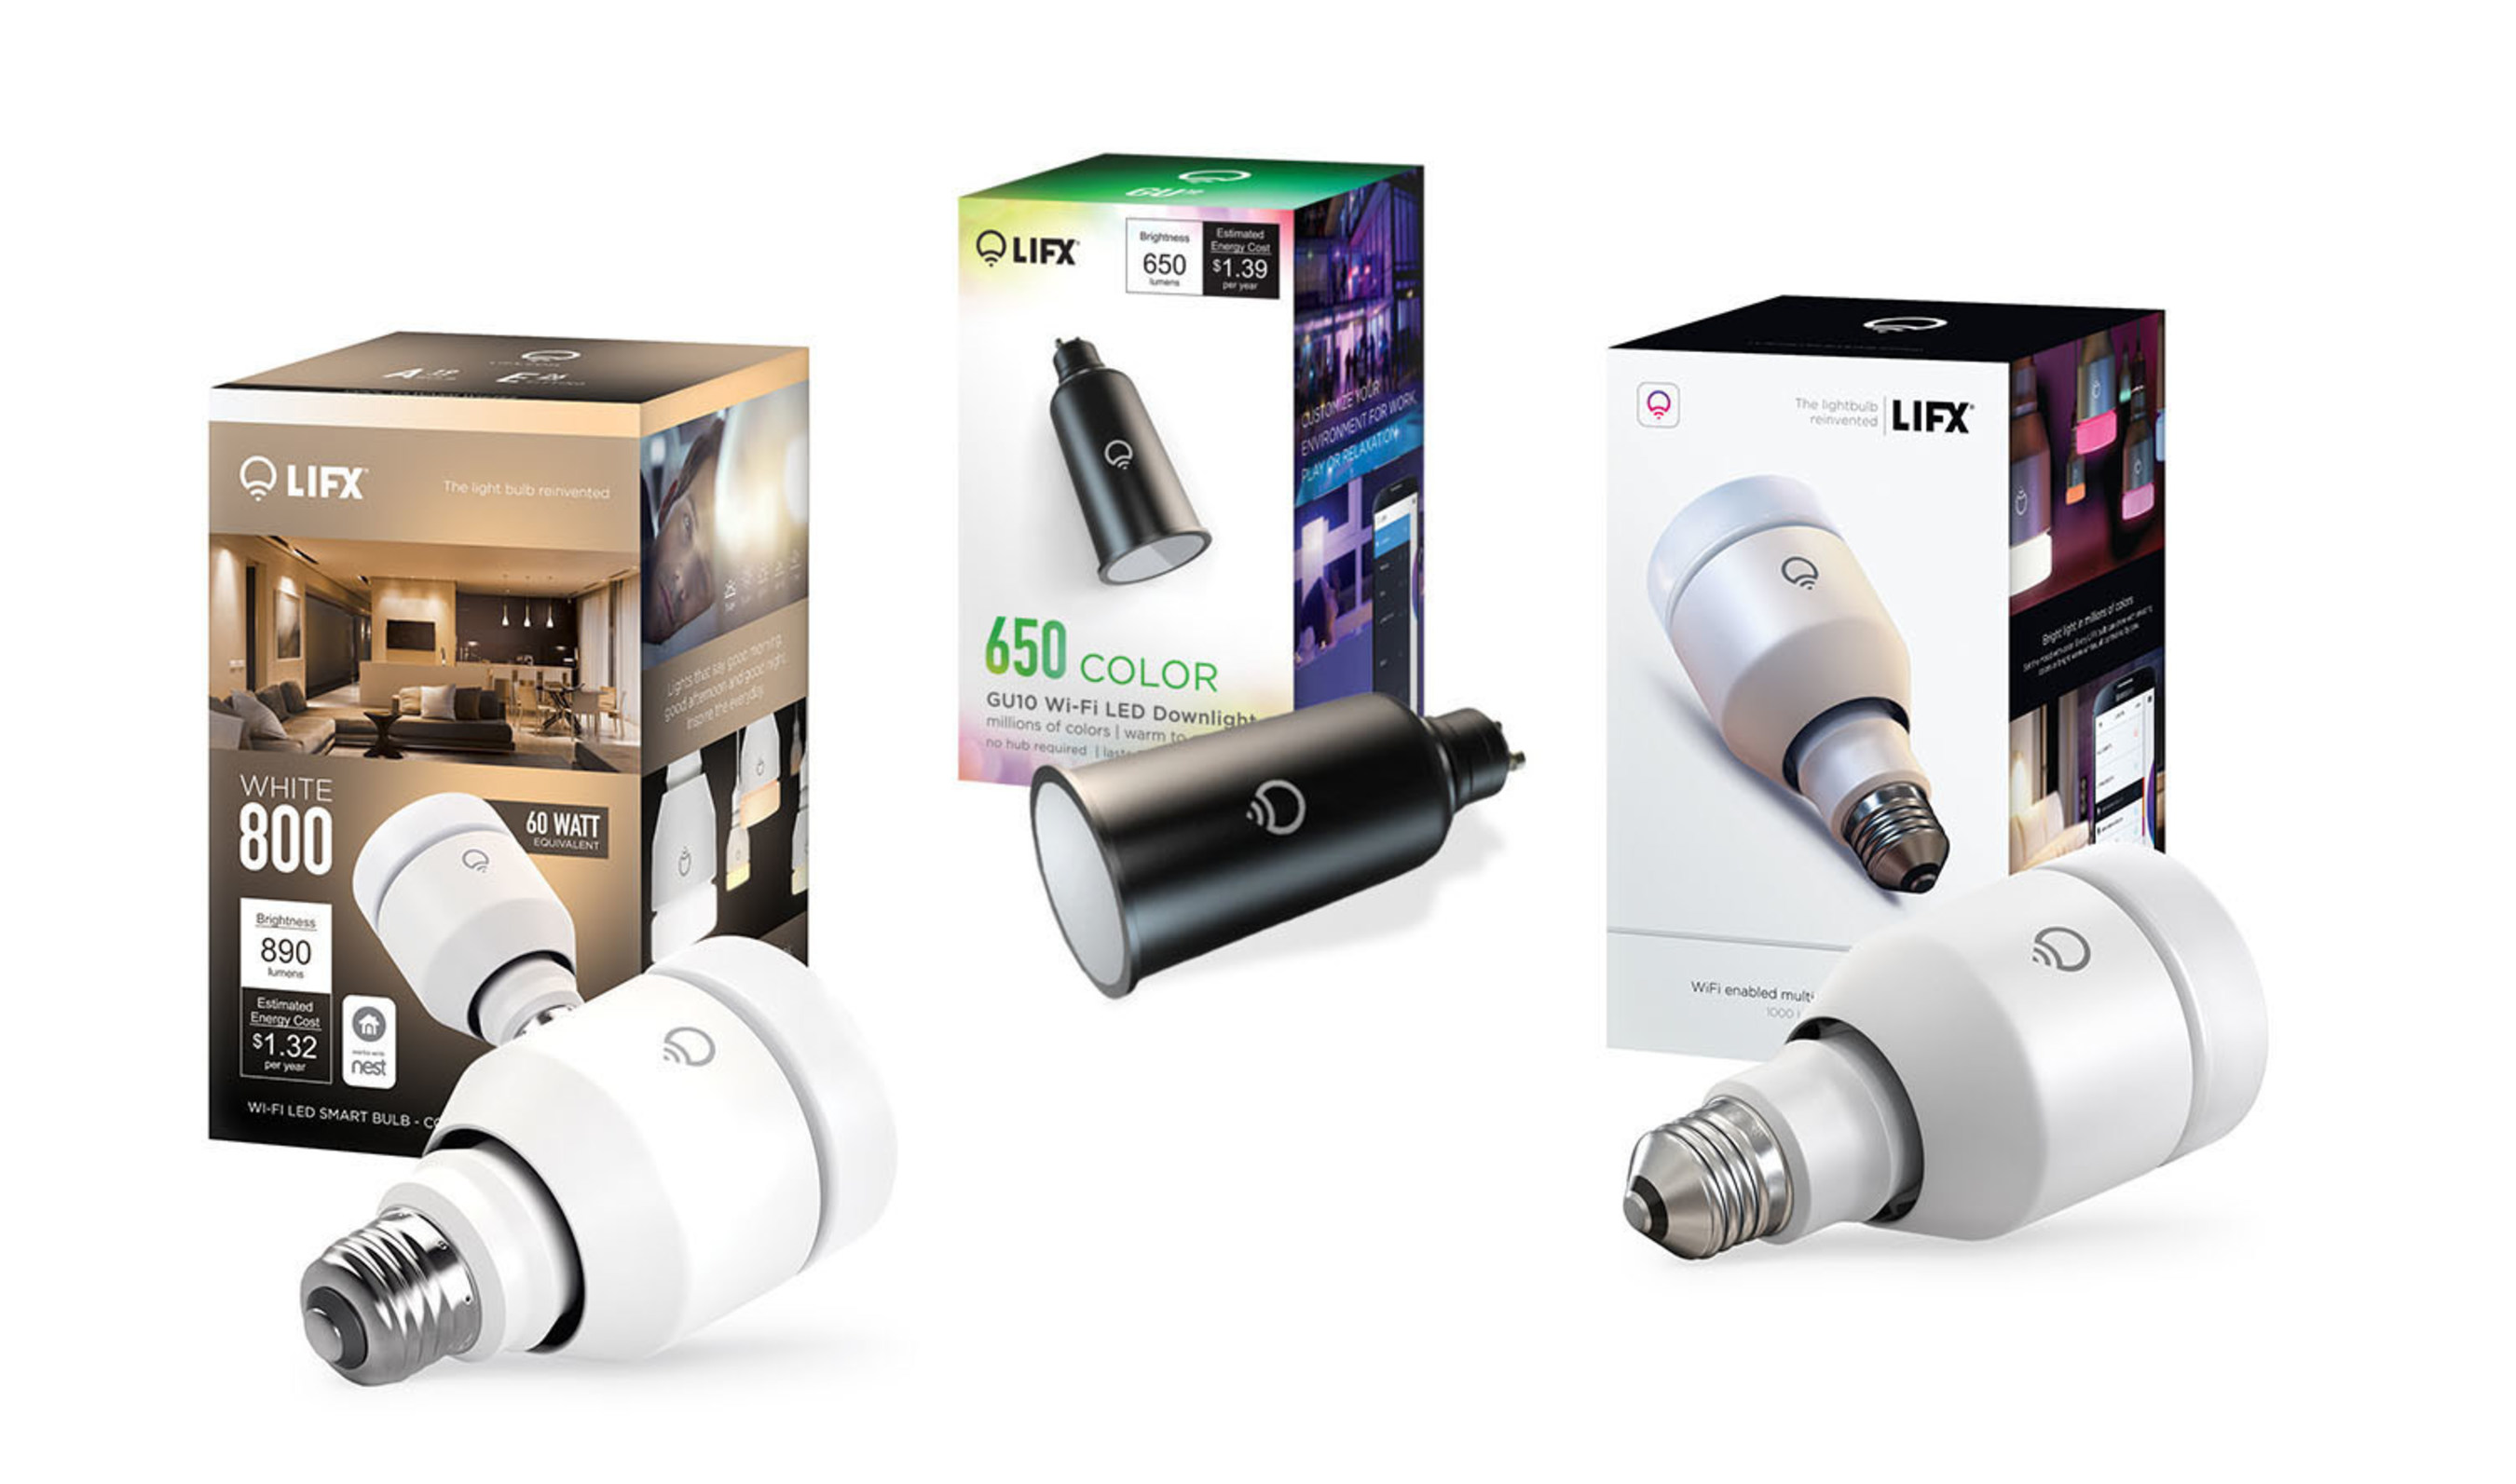 The LIFX LED smart bulb range now includes A19, A21 and GU10 Downlight form factors, all with LIFX's signature hassle-free Wi-Fi connectivity - no hub required.